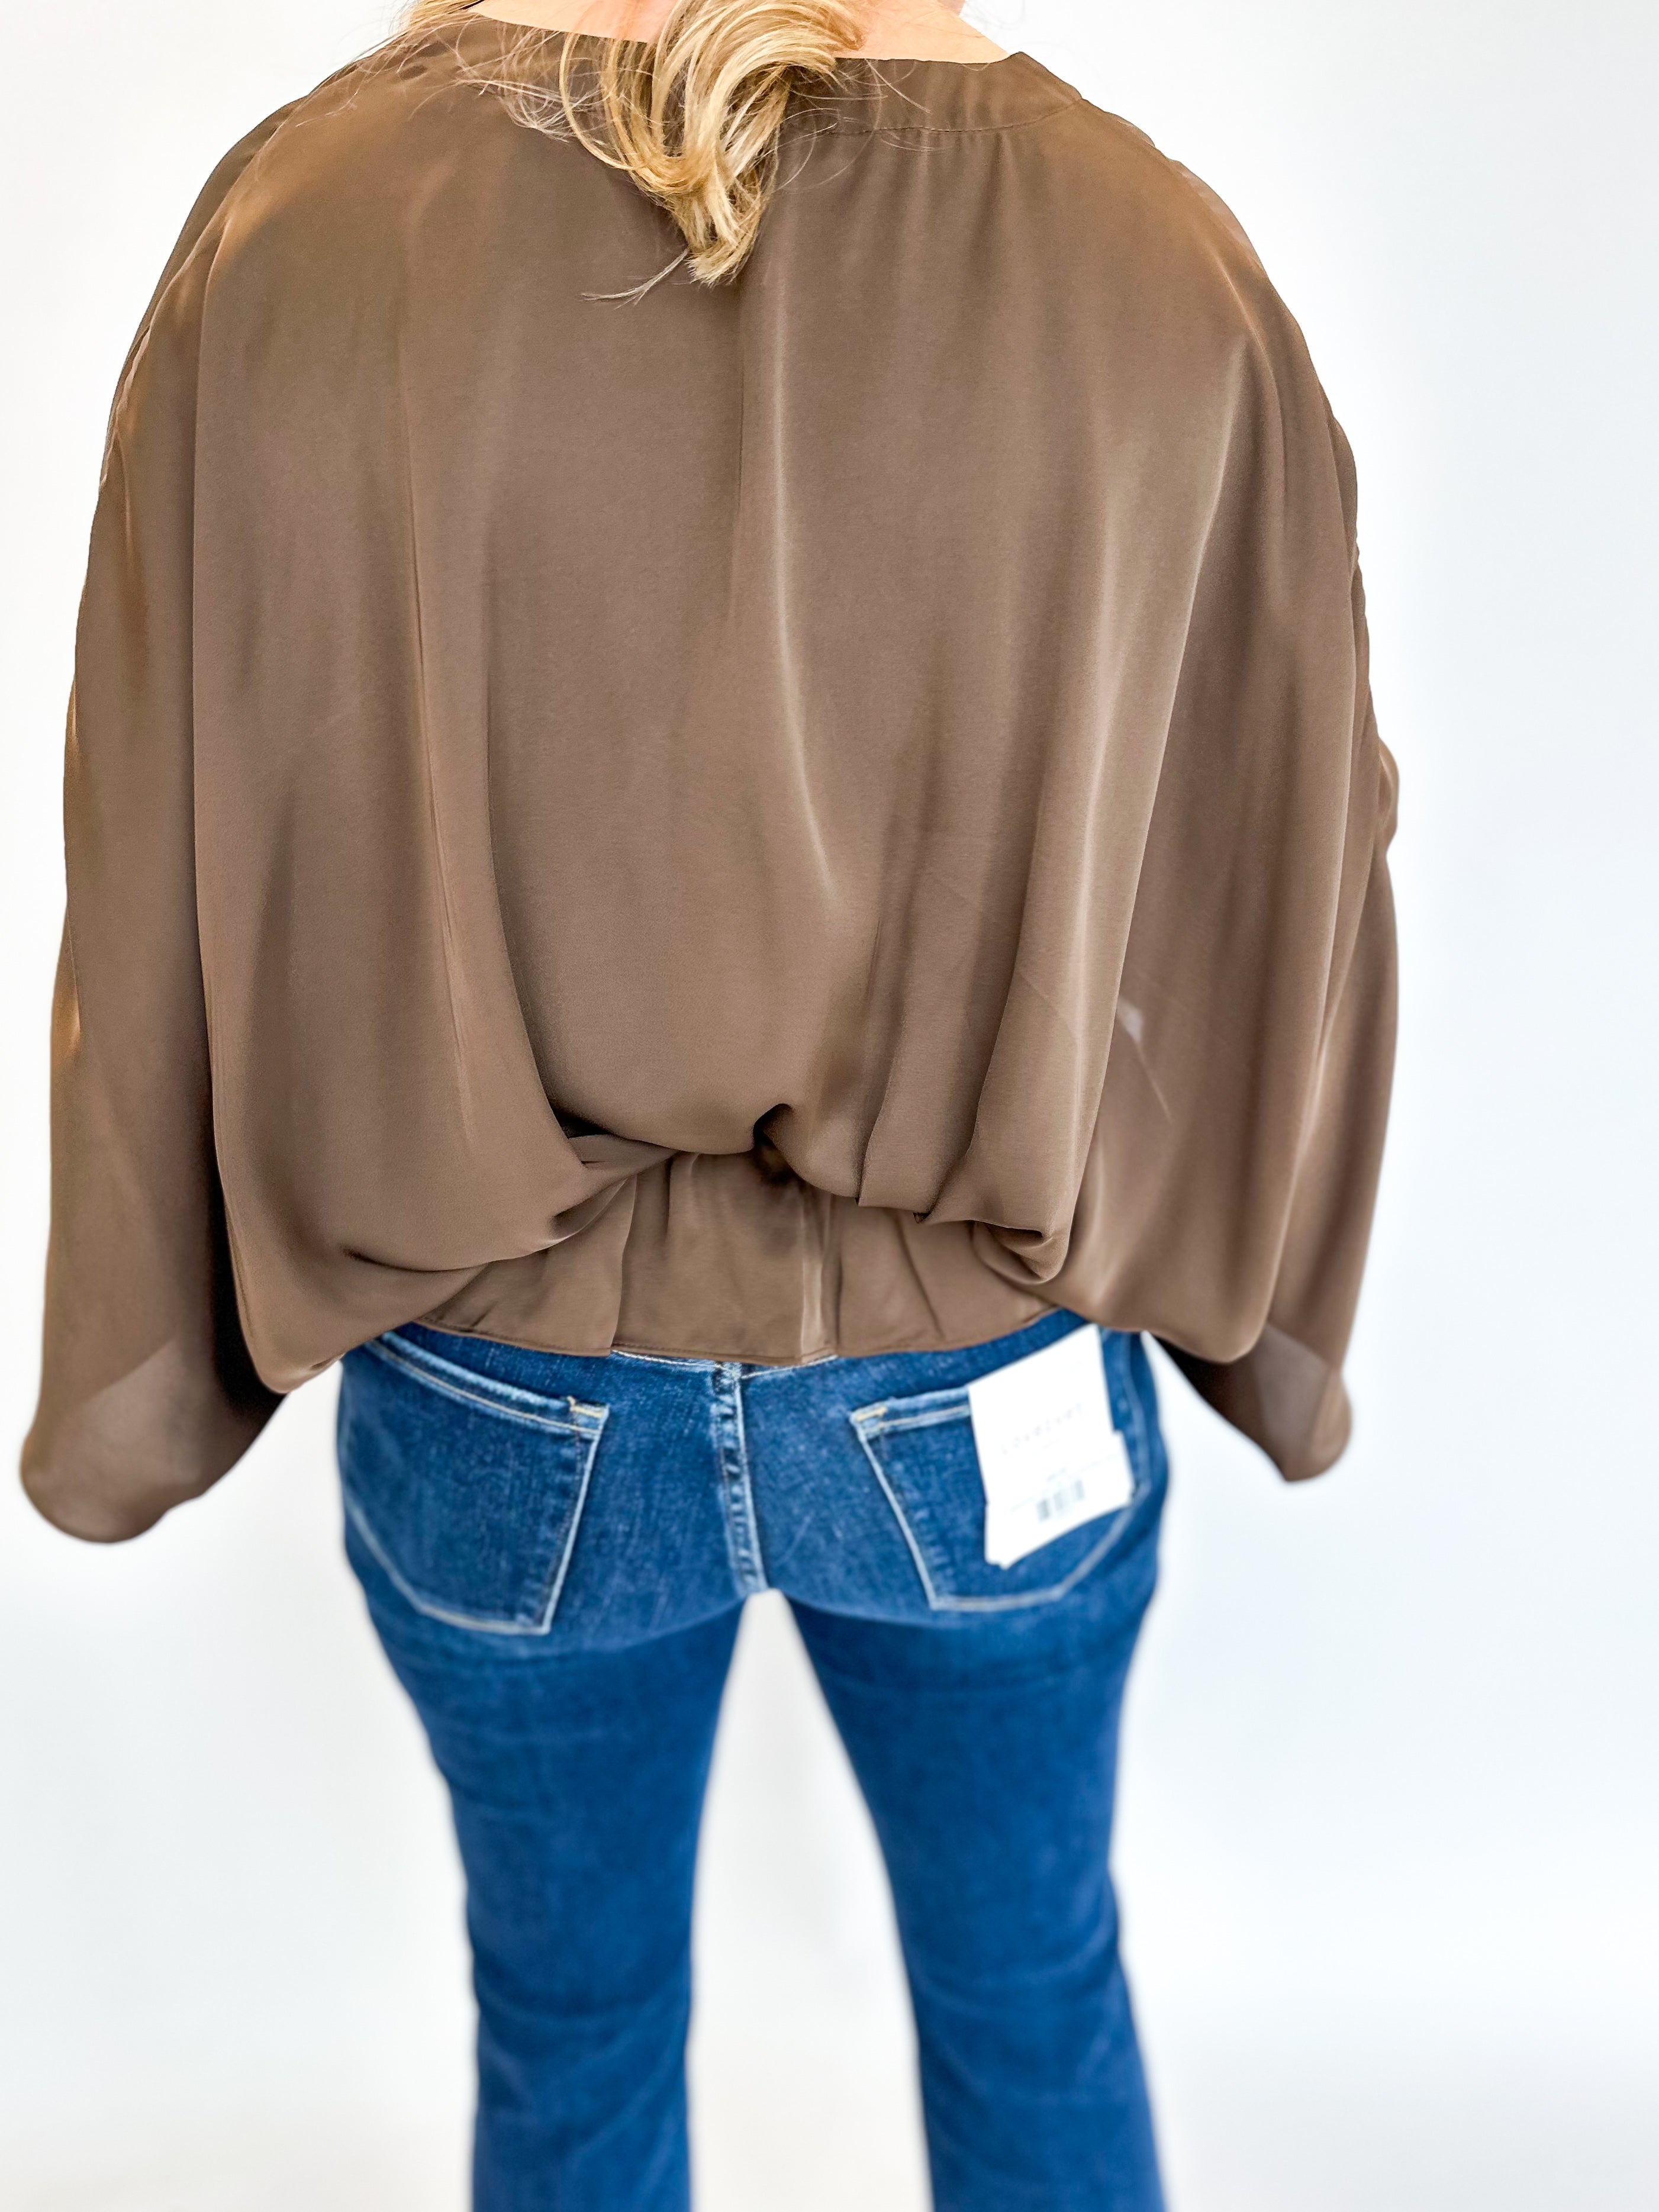 You're So Golden Blouse-200 Fashion Blouses-GRADE & GATHER-July & June Women's Fashion Boutique Located in San Antonio, Texas